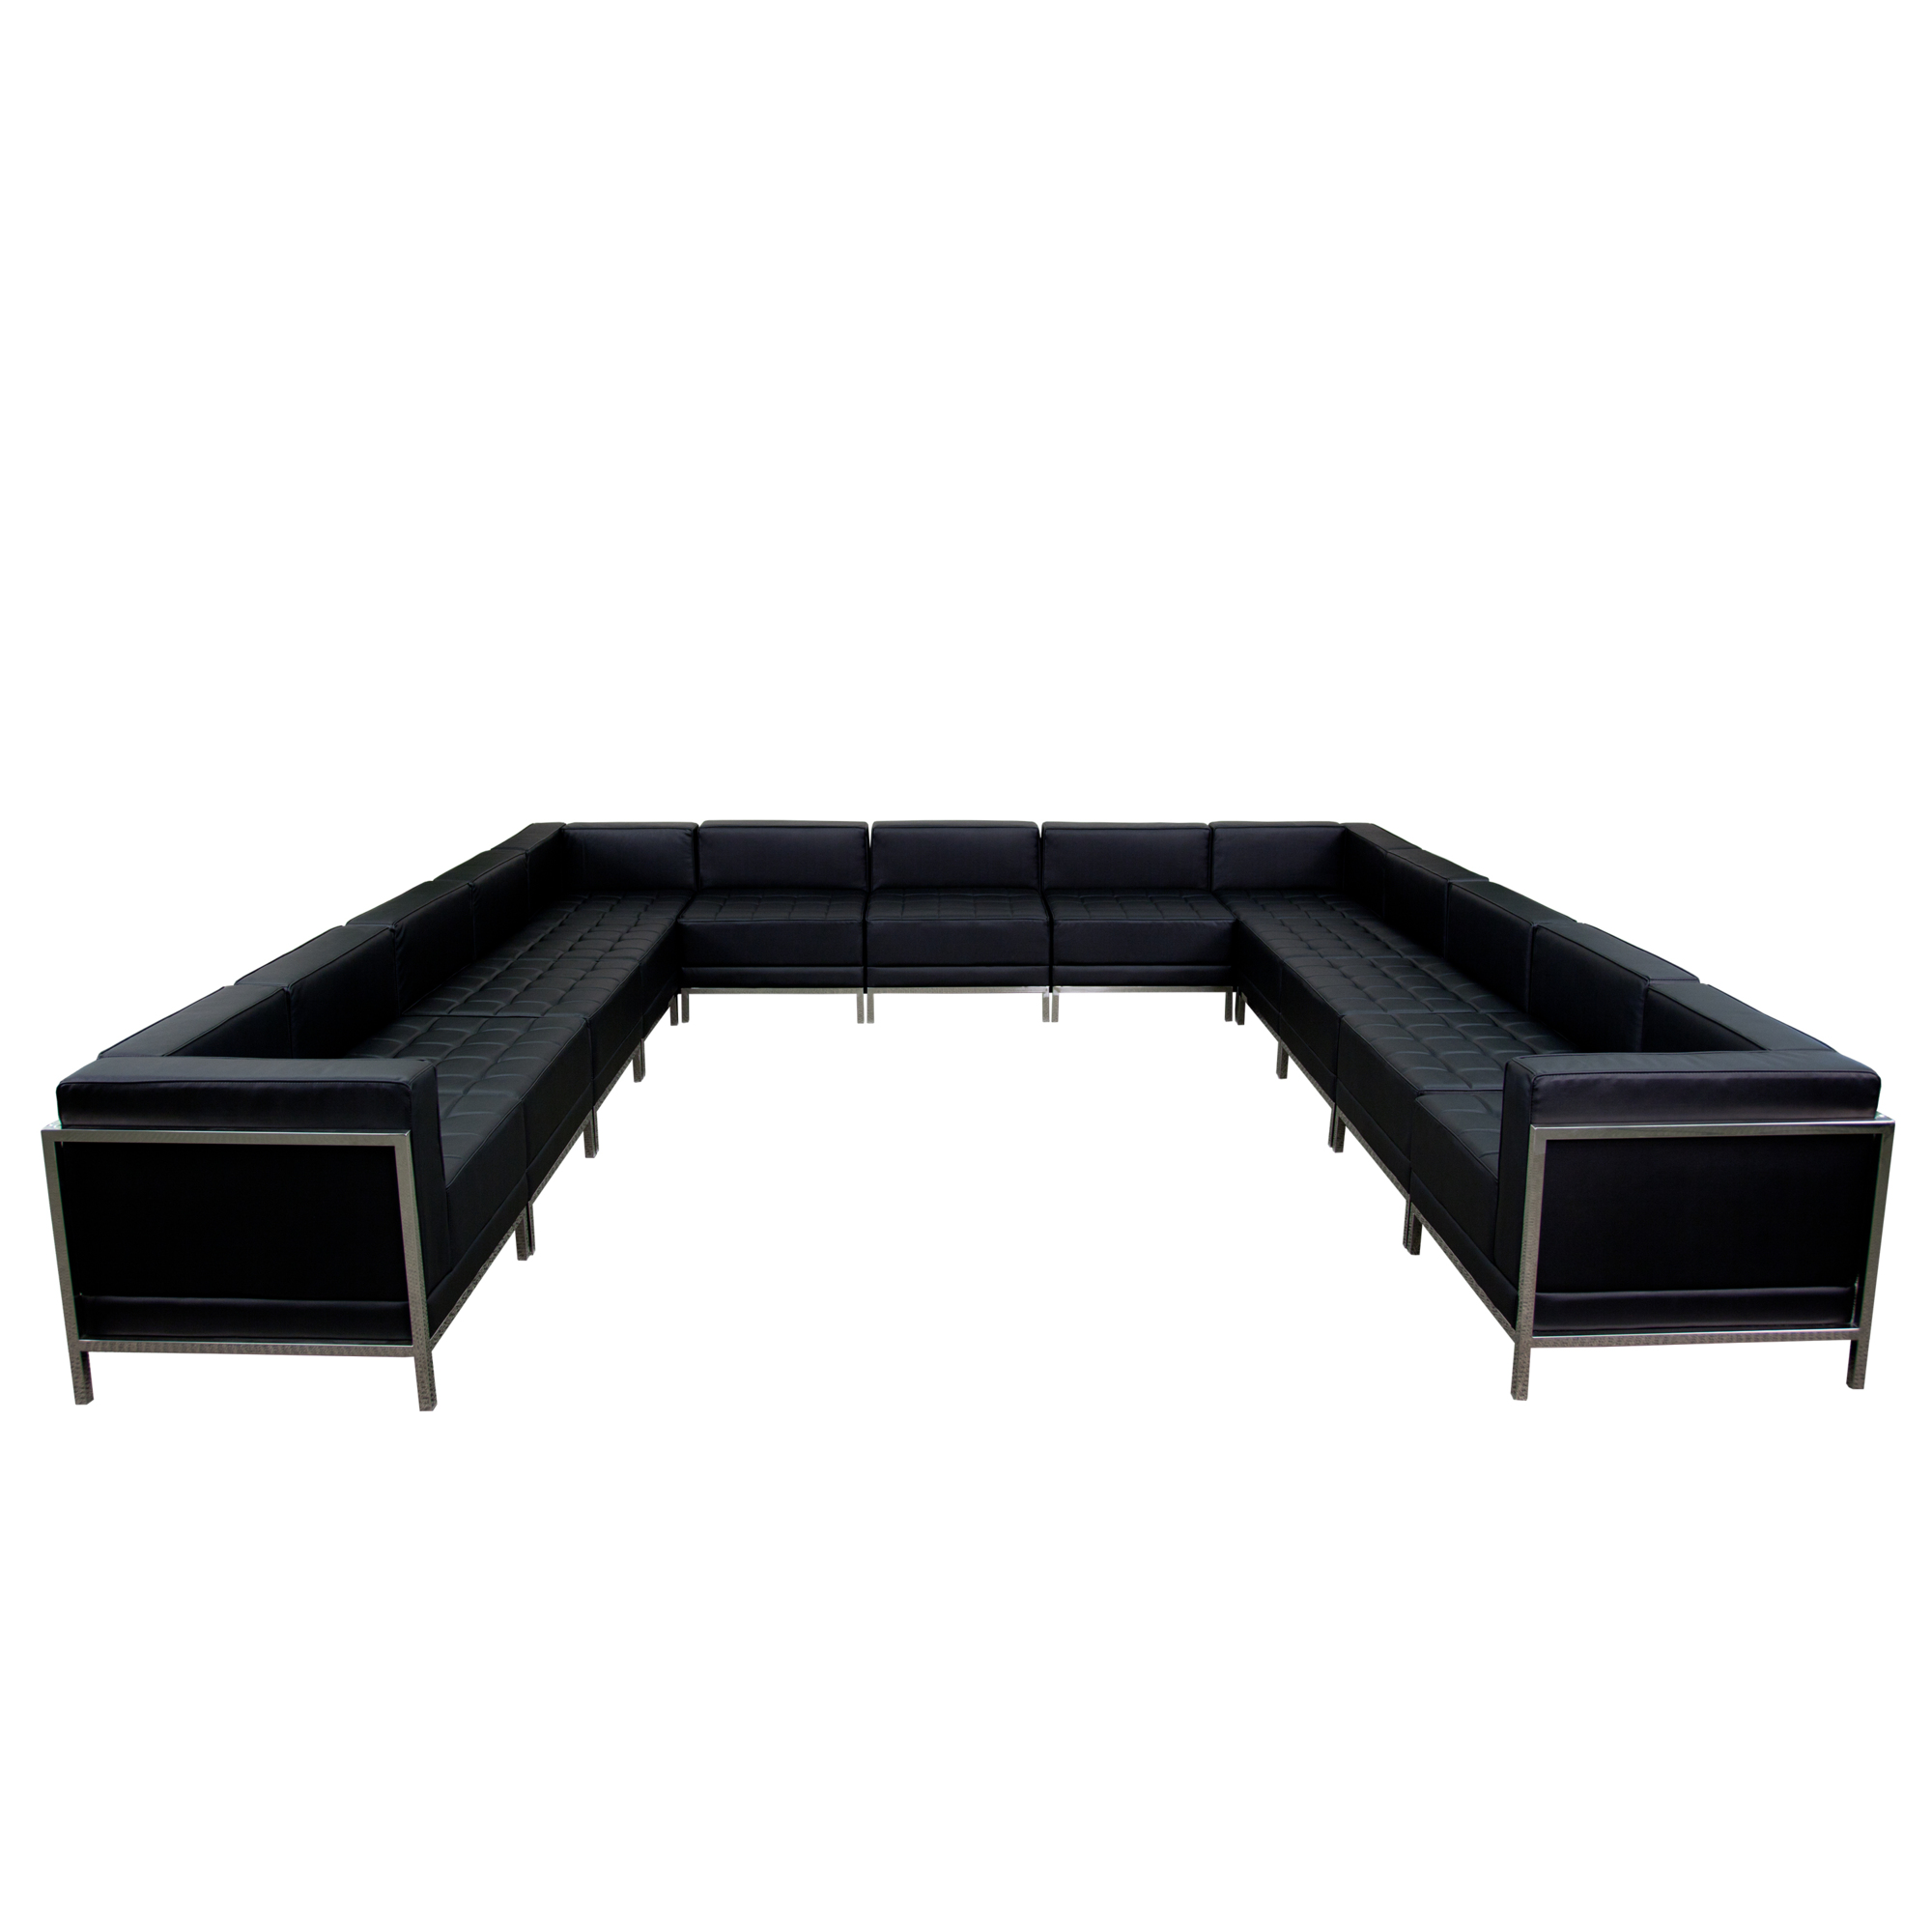 Flash Furniture, 13 PC Black LeatherSoft Modular U-Shape Sectional, Primary Color Black, Included (qty.) 13, Model ZBIMAGUSECTSET2